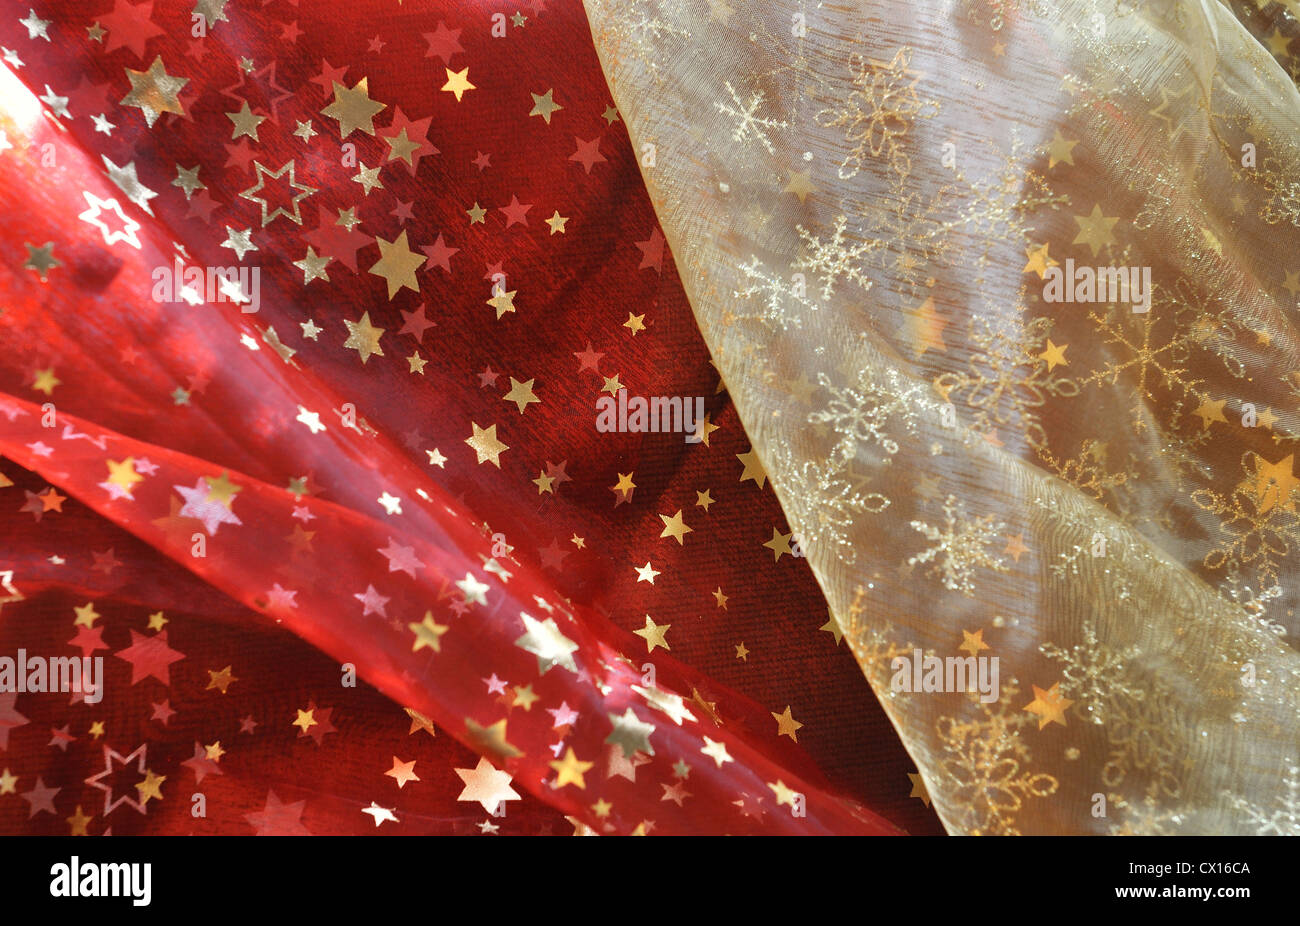 two pieces of fabric with Christmas motifs Stock Photo